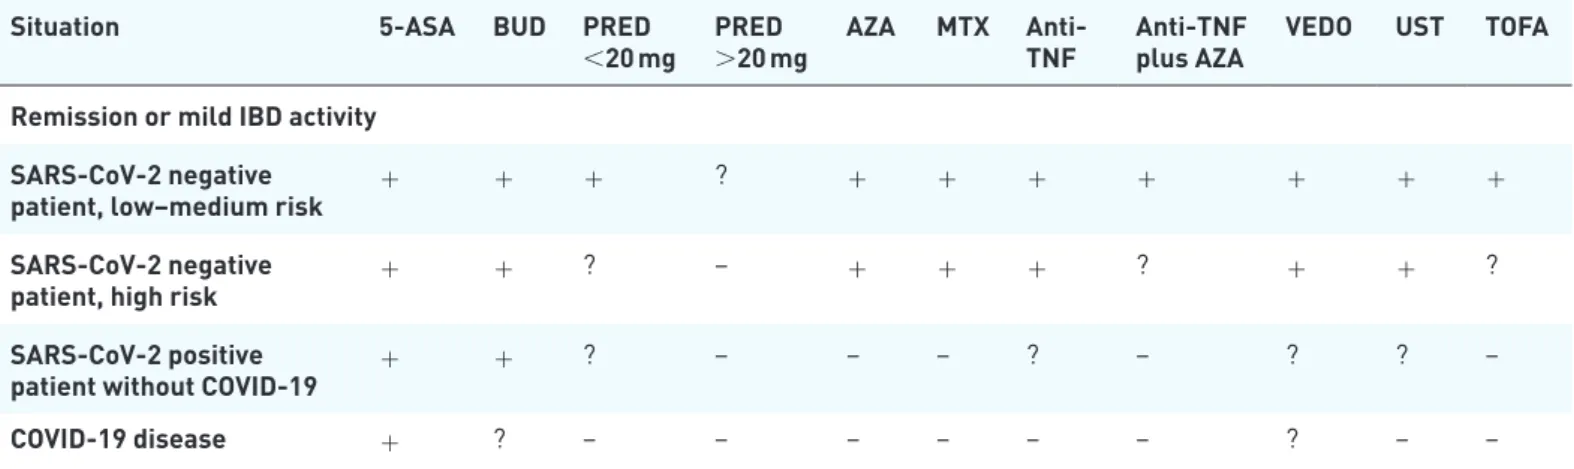 Table 4.  Therapeutic recommendation according to the pandemic situation and SARS-CoV-2 risk for IBD patients in remission or  with mild disease activity